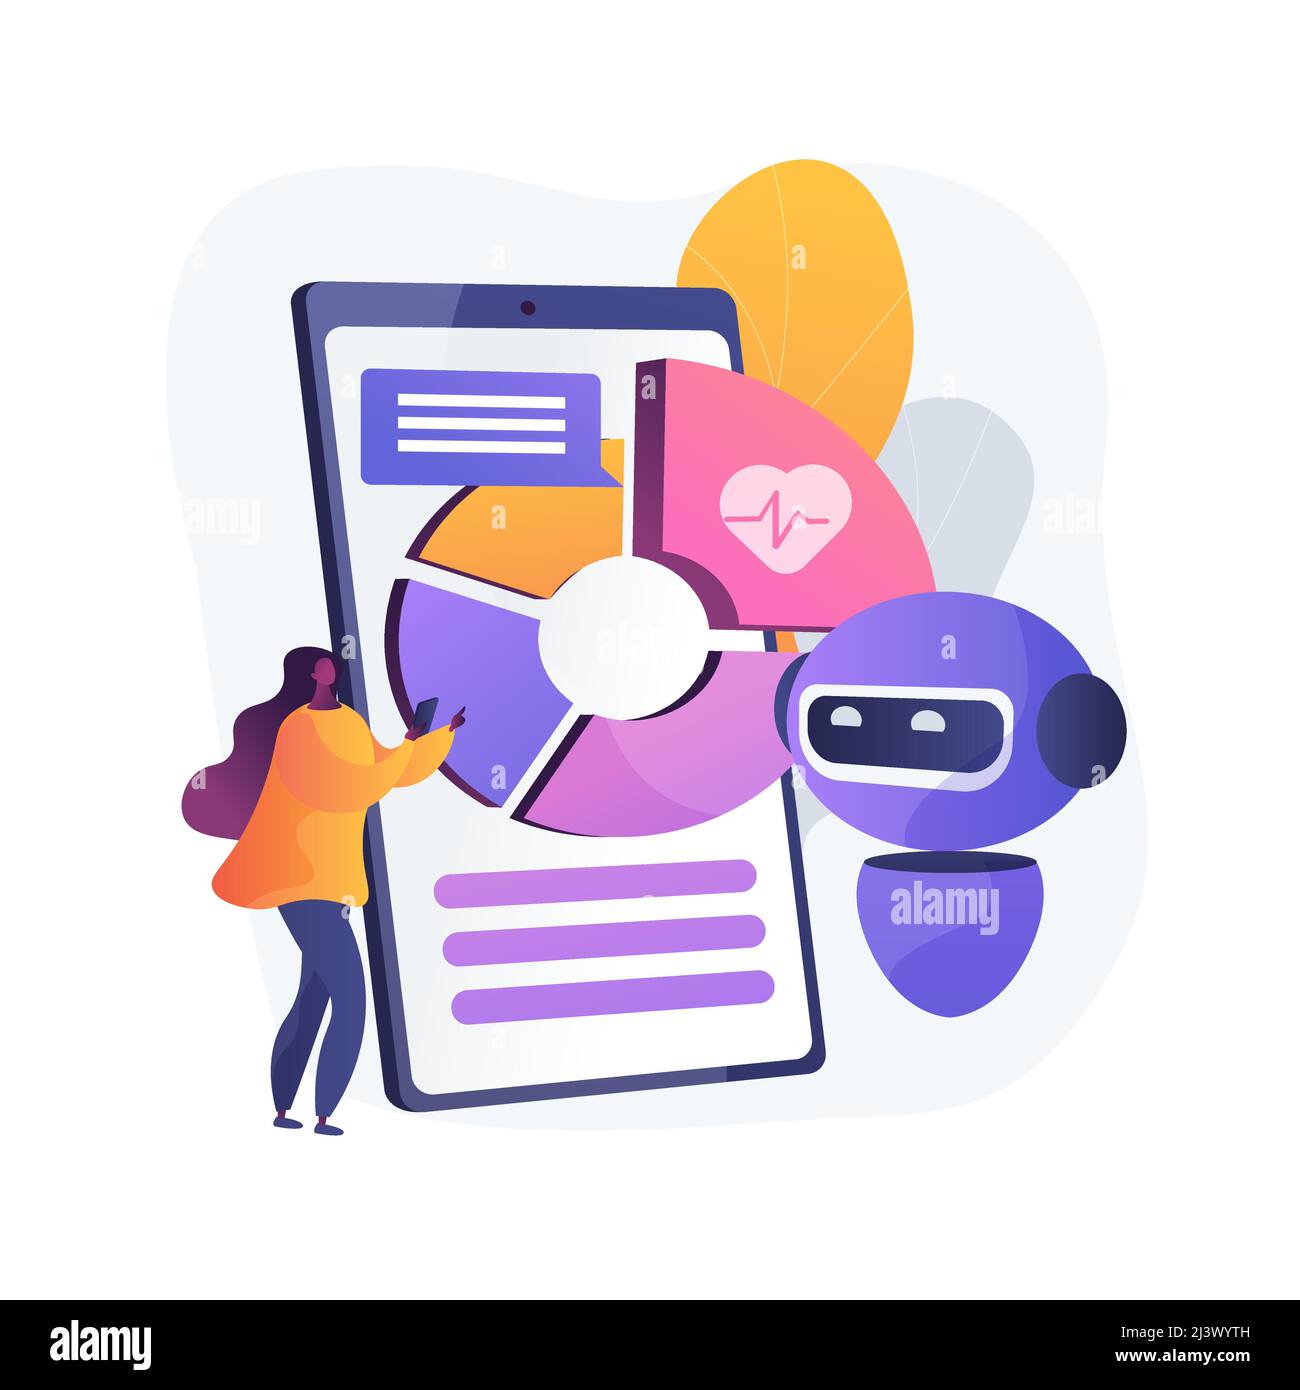 Digital wellbeing abstract concept vector illustration. Office wellbeing, digital health, device stress management, device and internet free time, soc Stock Vector